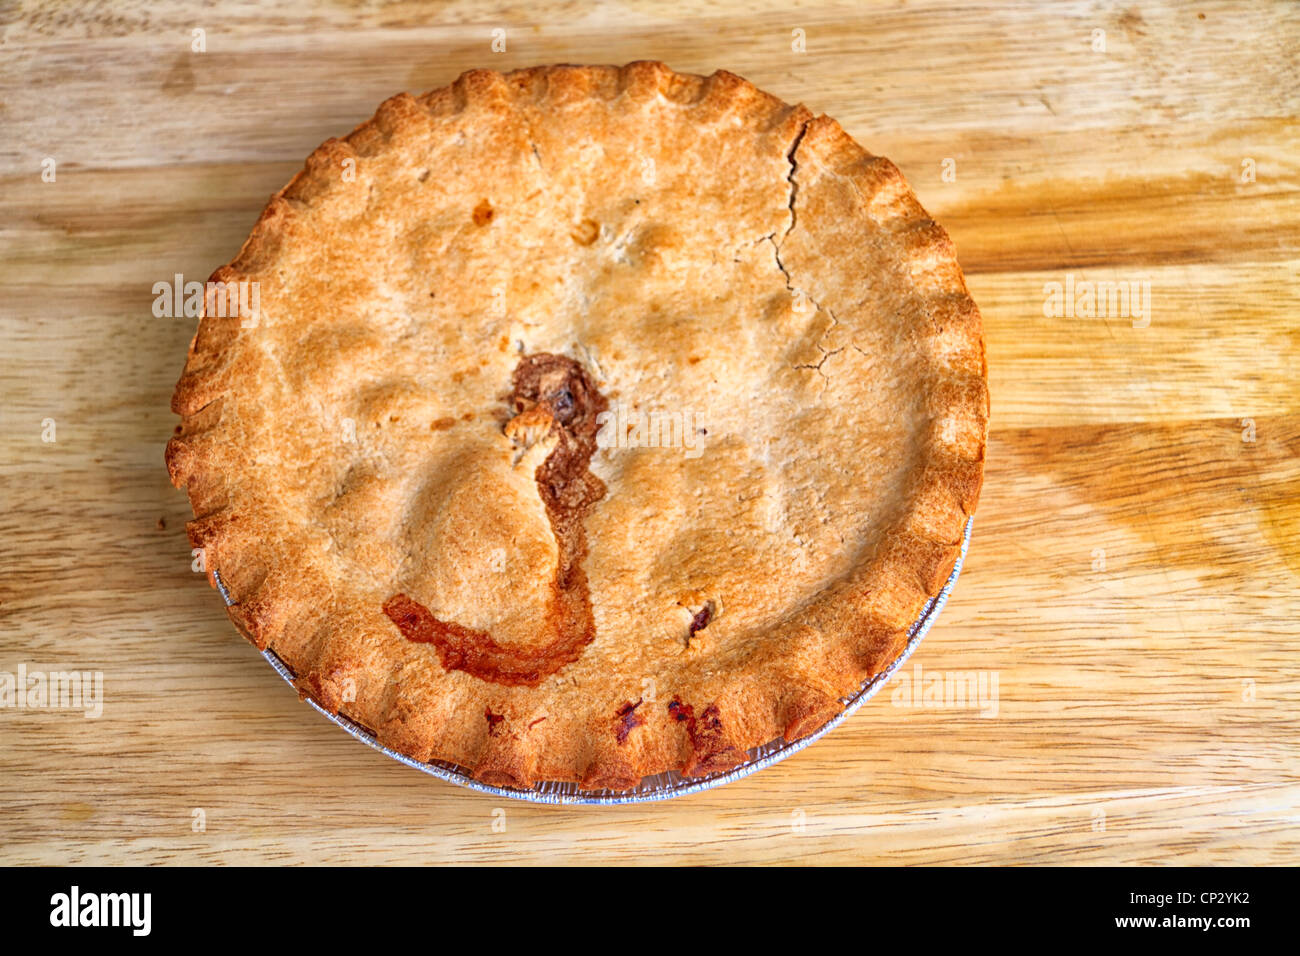 Cooked pie on a wooden board Stock Photo